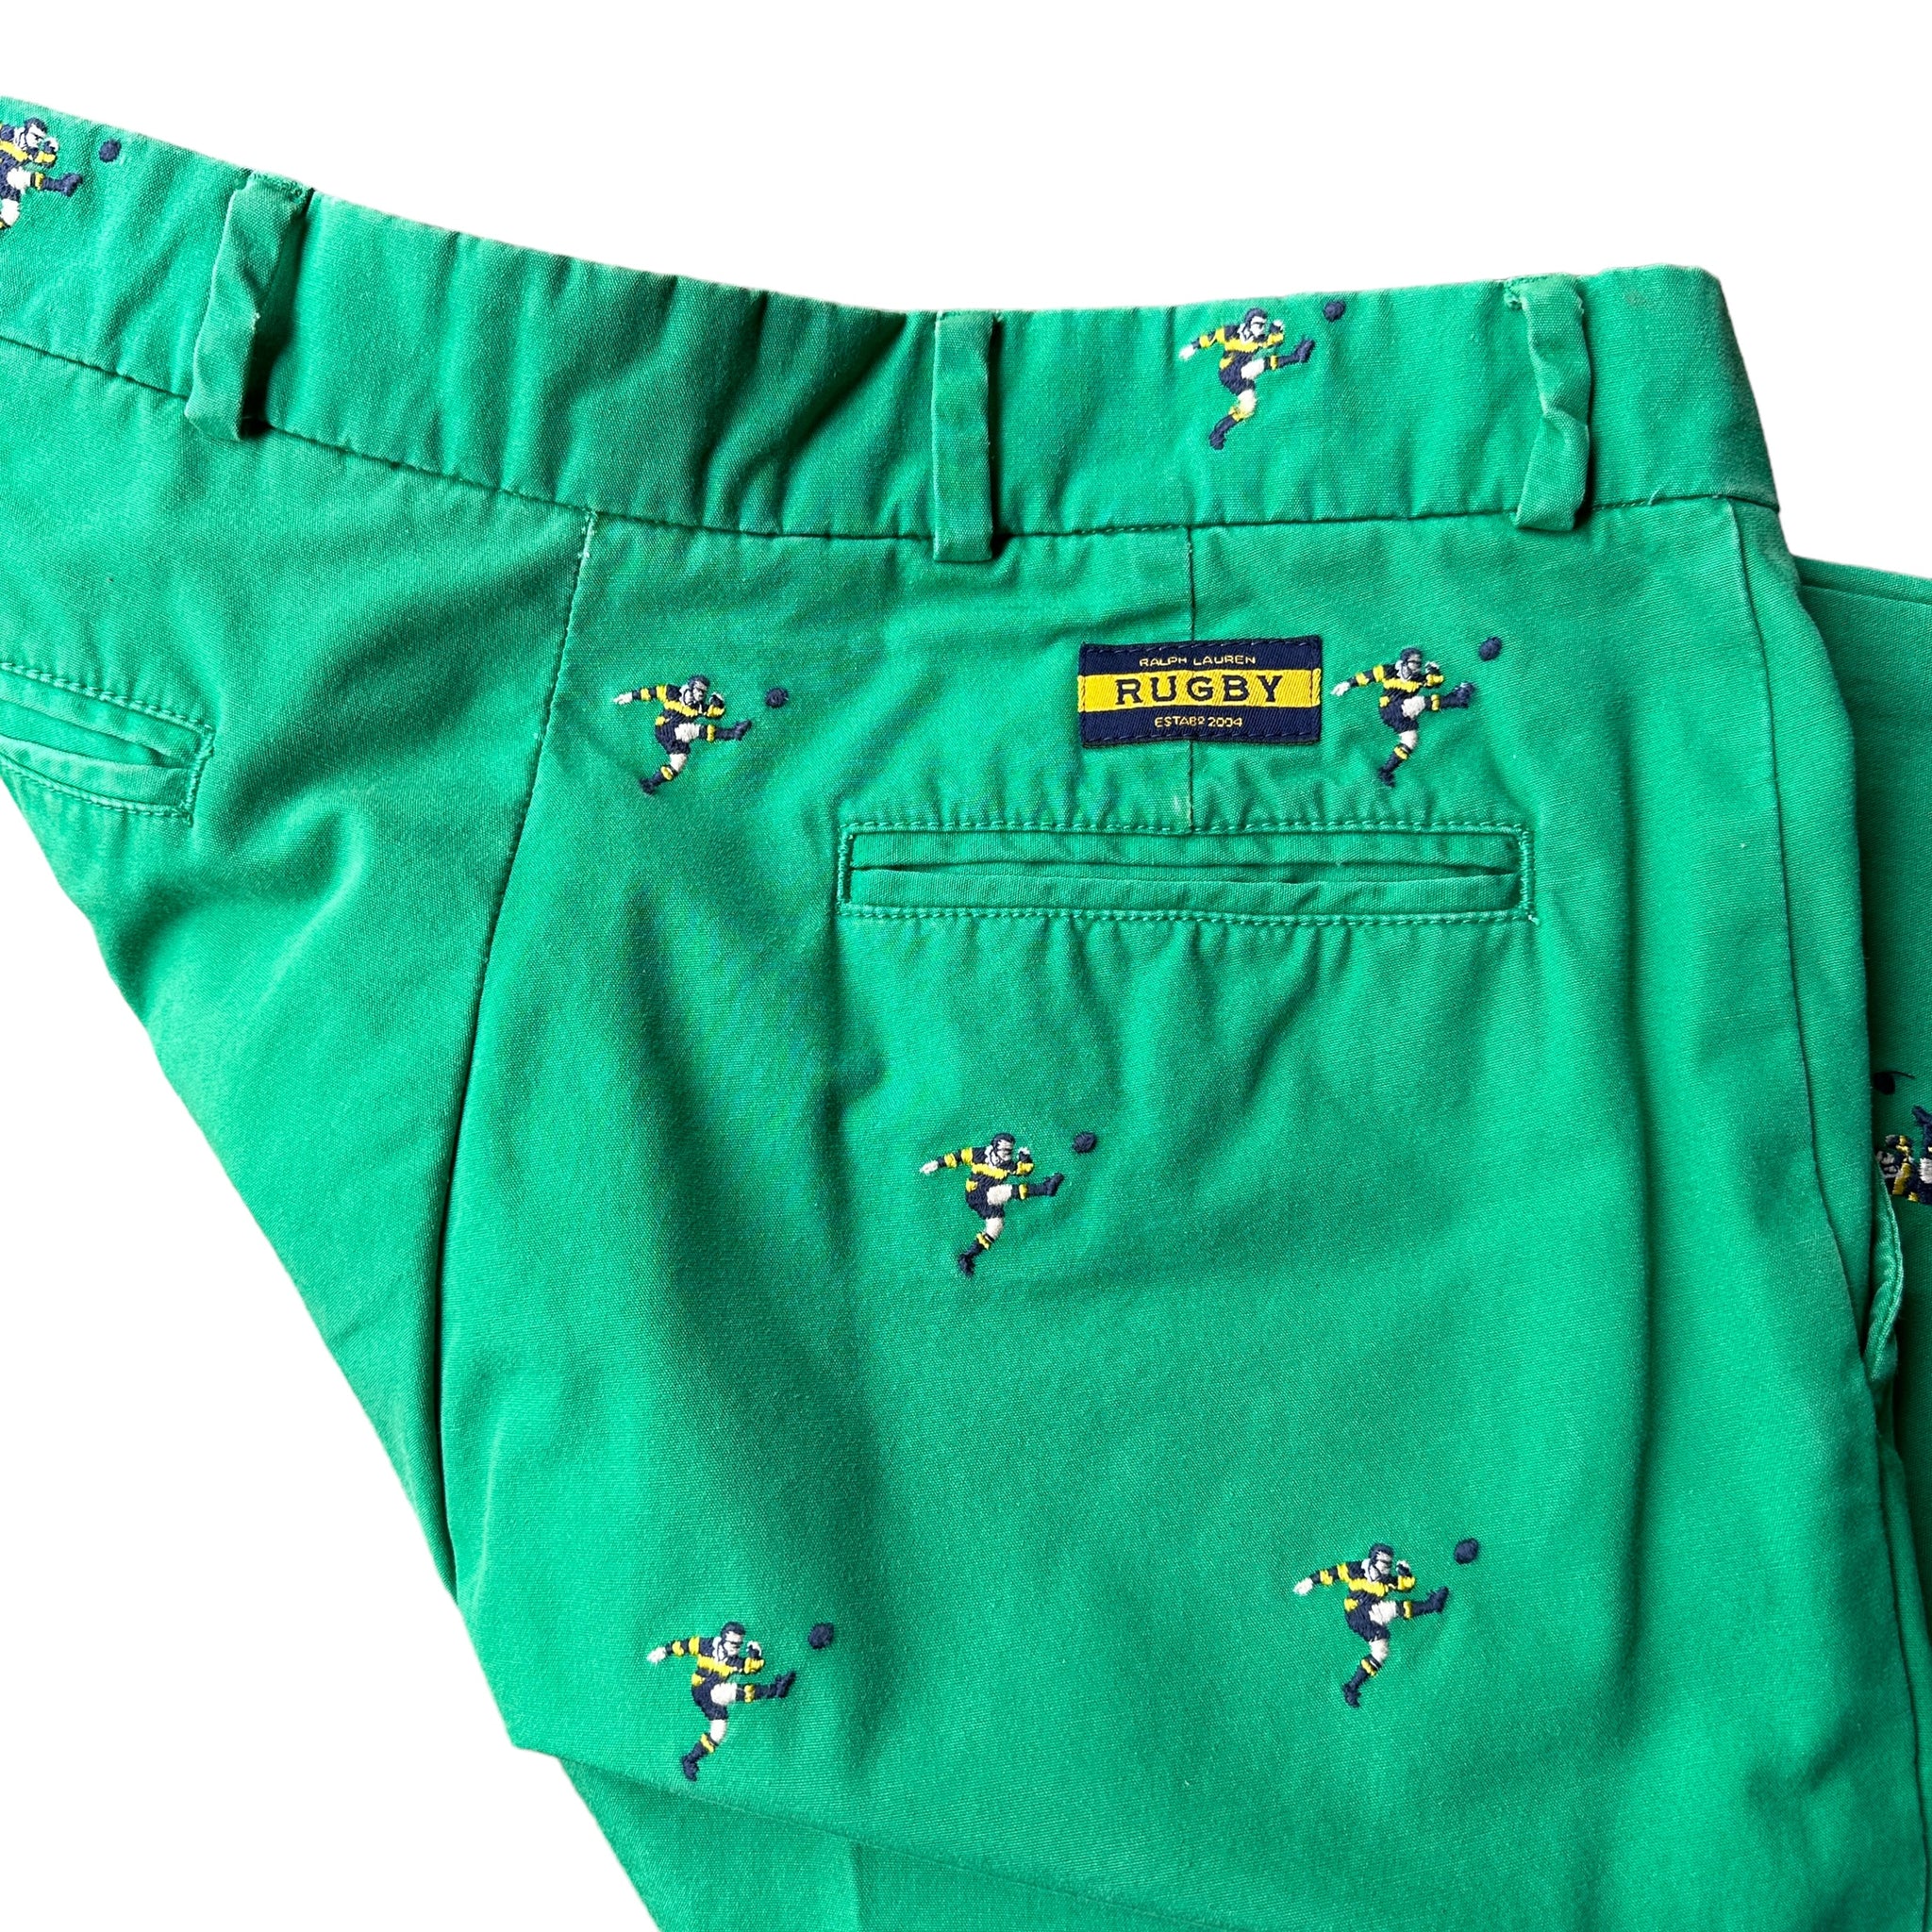 Rugby Ralph lauren rugby player pants 30/32